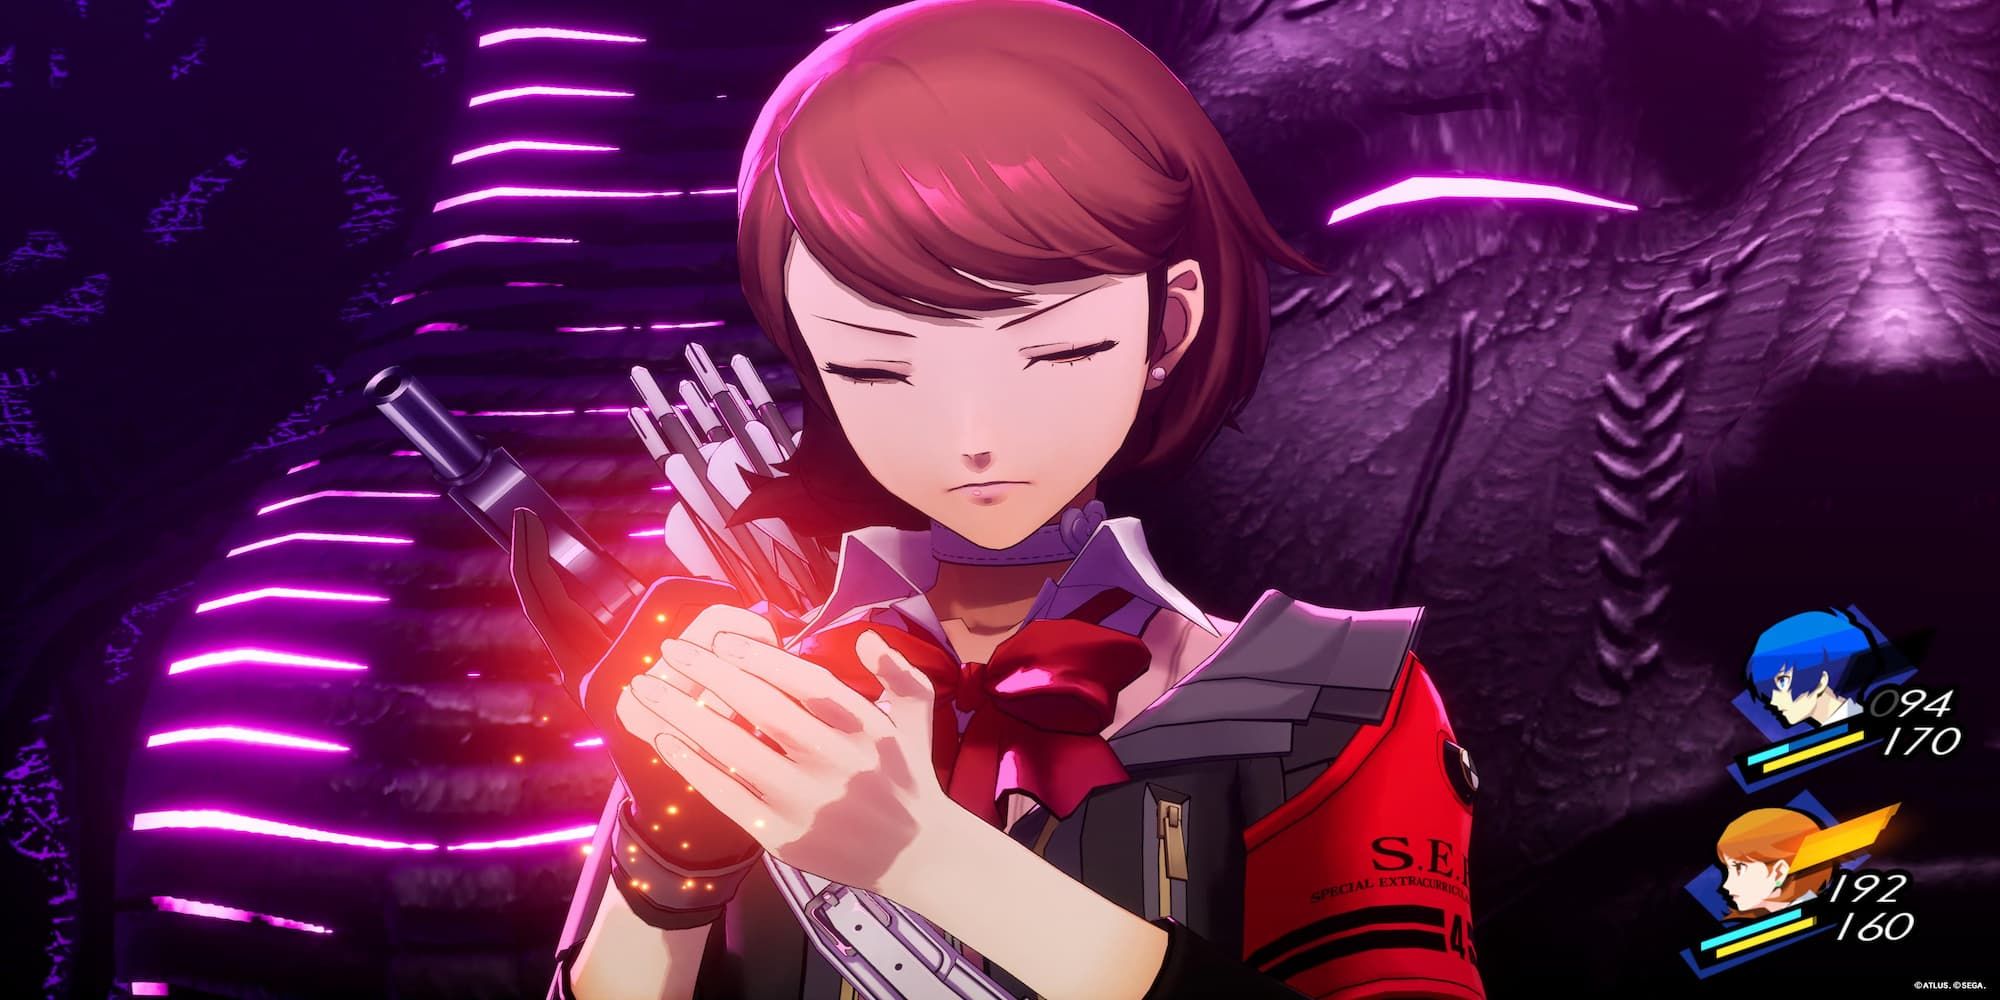 Persona 3 Reload Protagonist and Yukari Concept Art Shared [Update] -  Persona Central